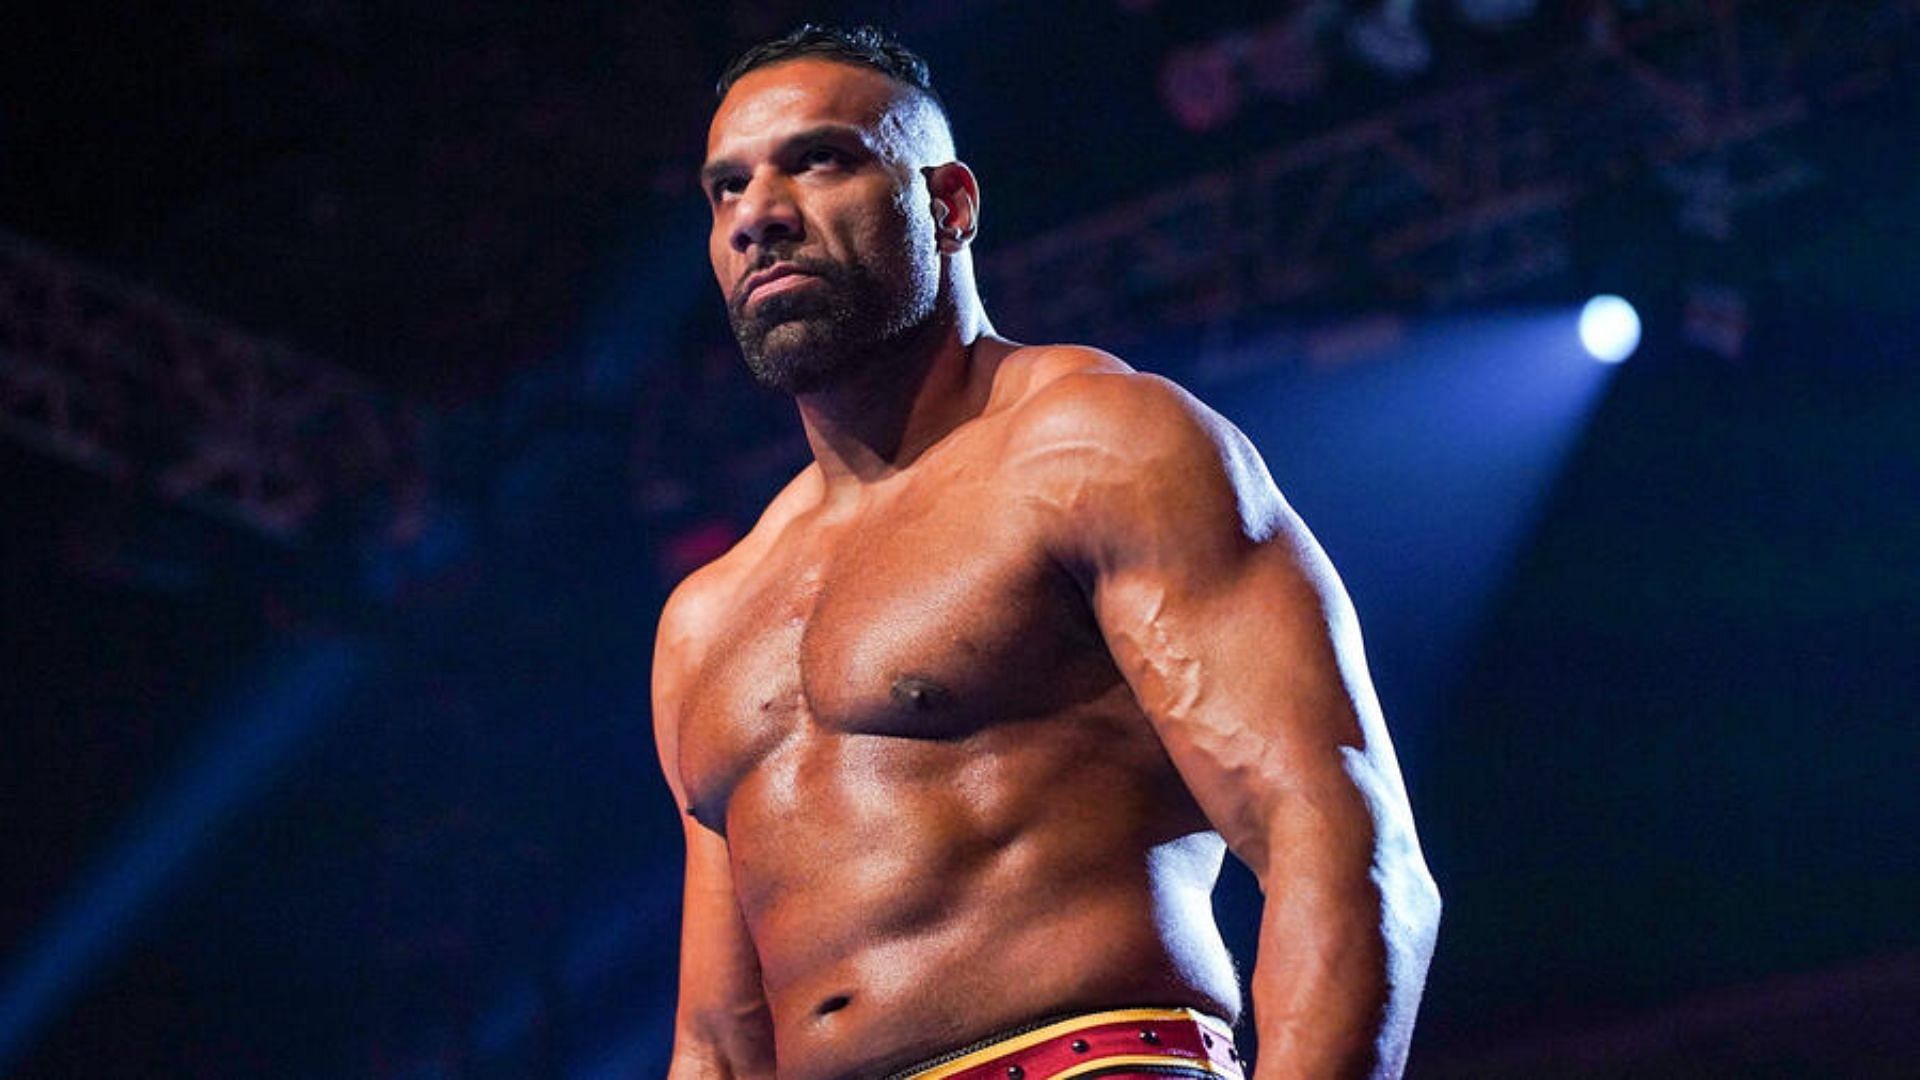 Jinder Mahal recently parted ways with WWE 